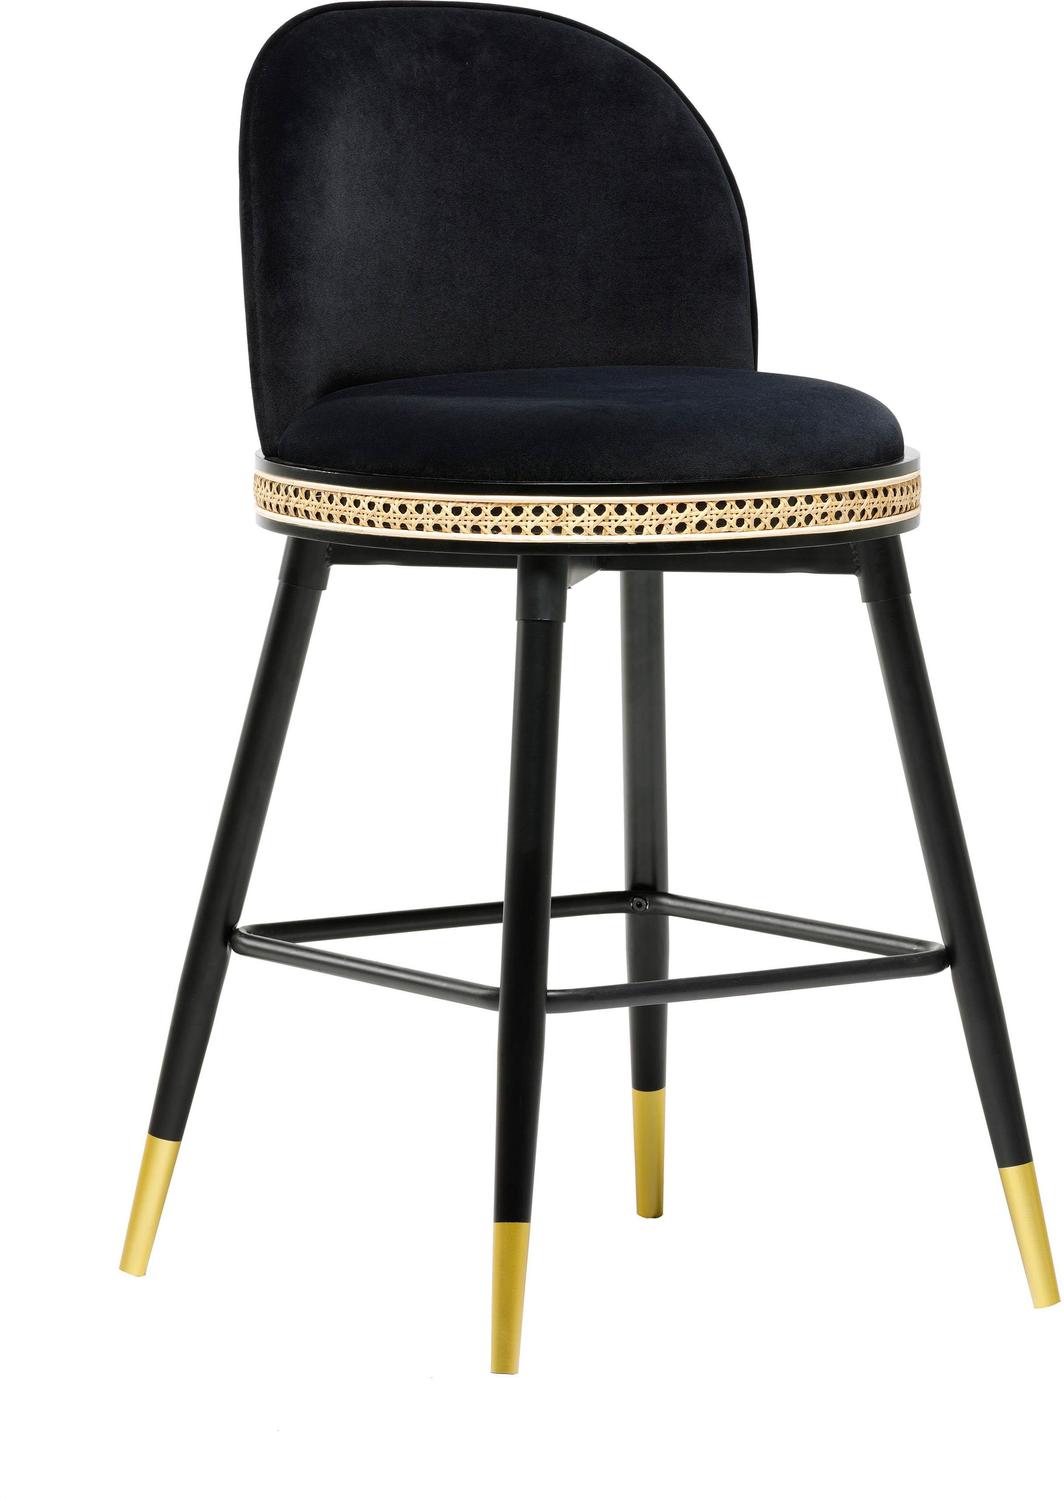 Tov Furniture Stools Bar Chairs and Stools Black